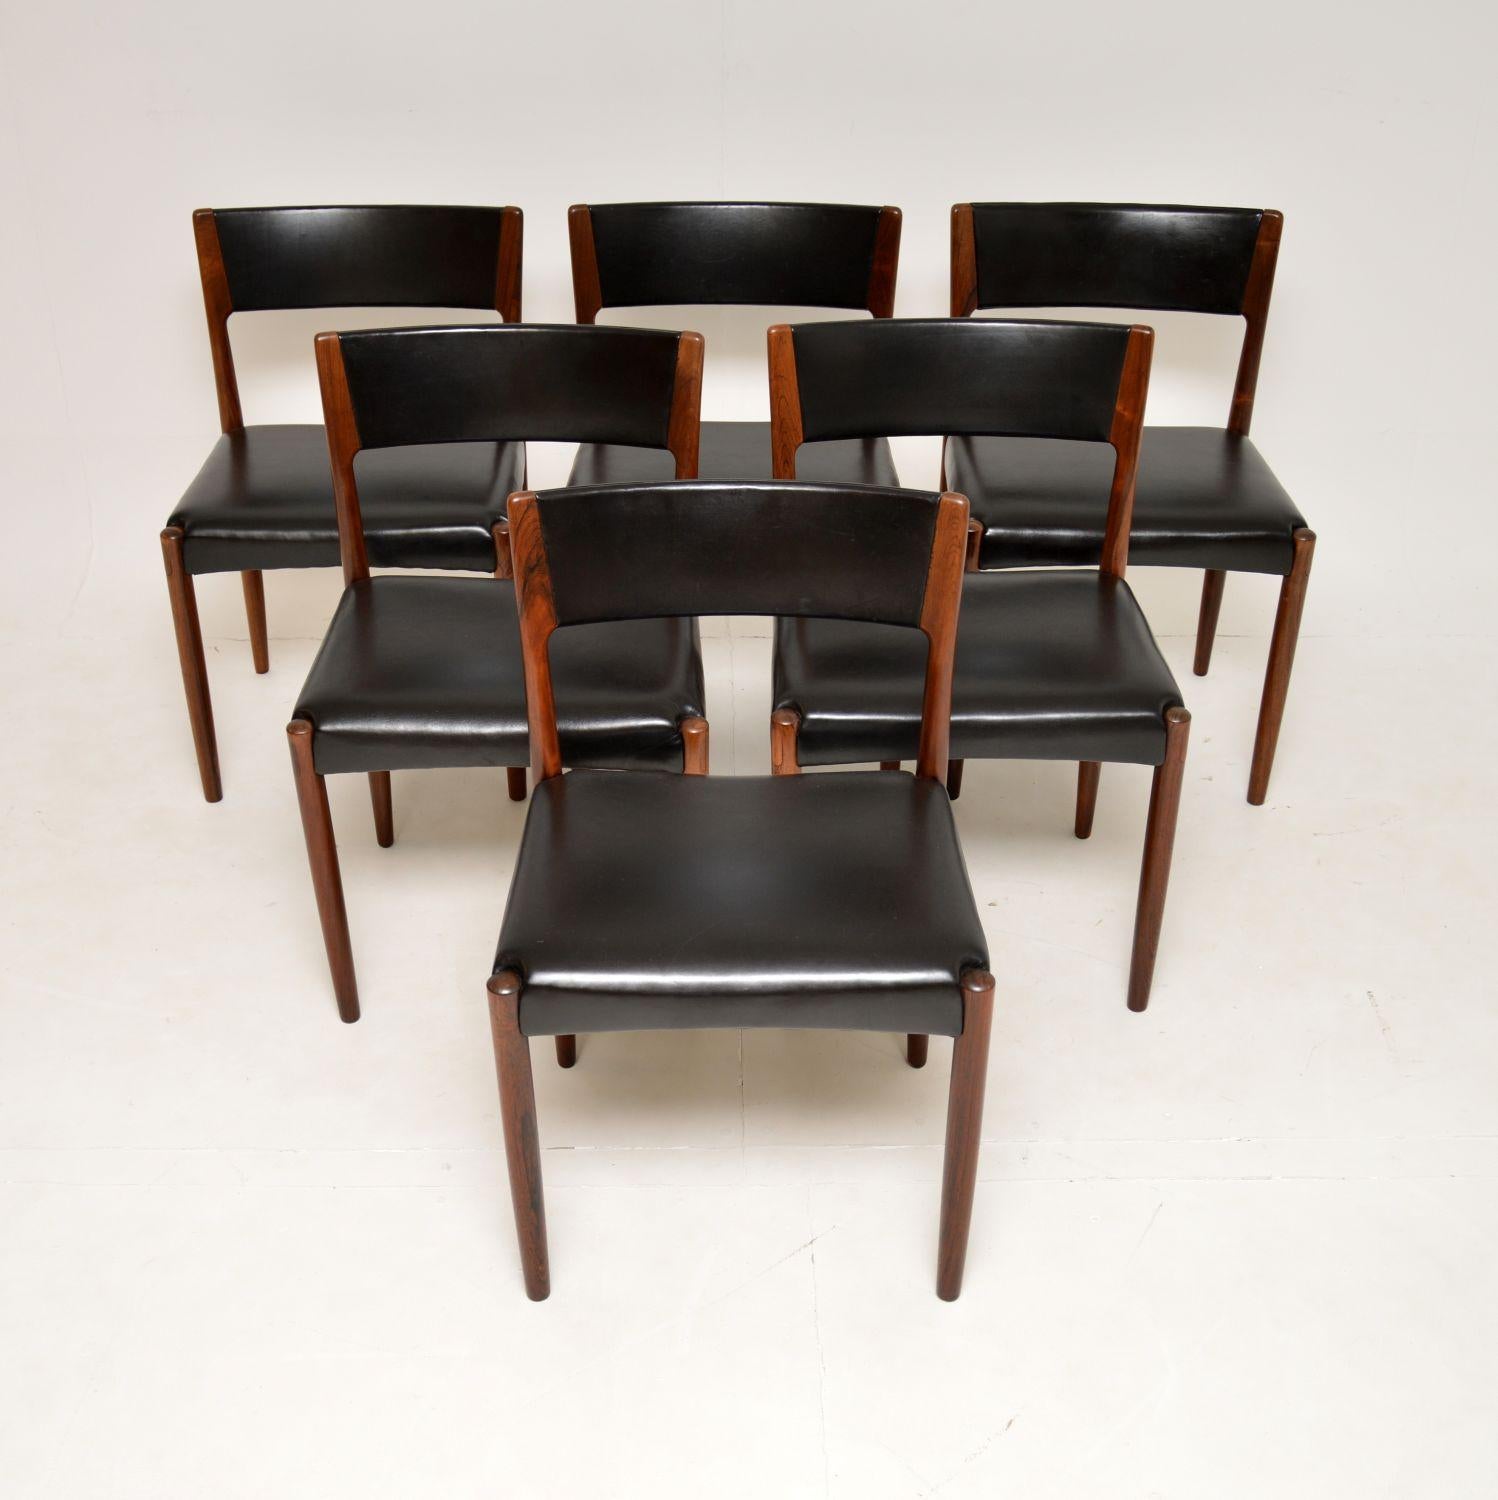 A stunning set of Danish dining chairs with black leather upholstery. They were designed by Harry Ostergaard and were made by Randers in the 1960’s.

They are of exquisite quality, with a beautiful design and gorgeous grain patterns. They are very